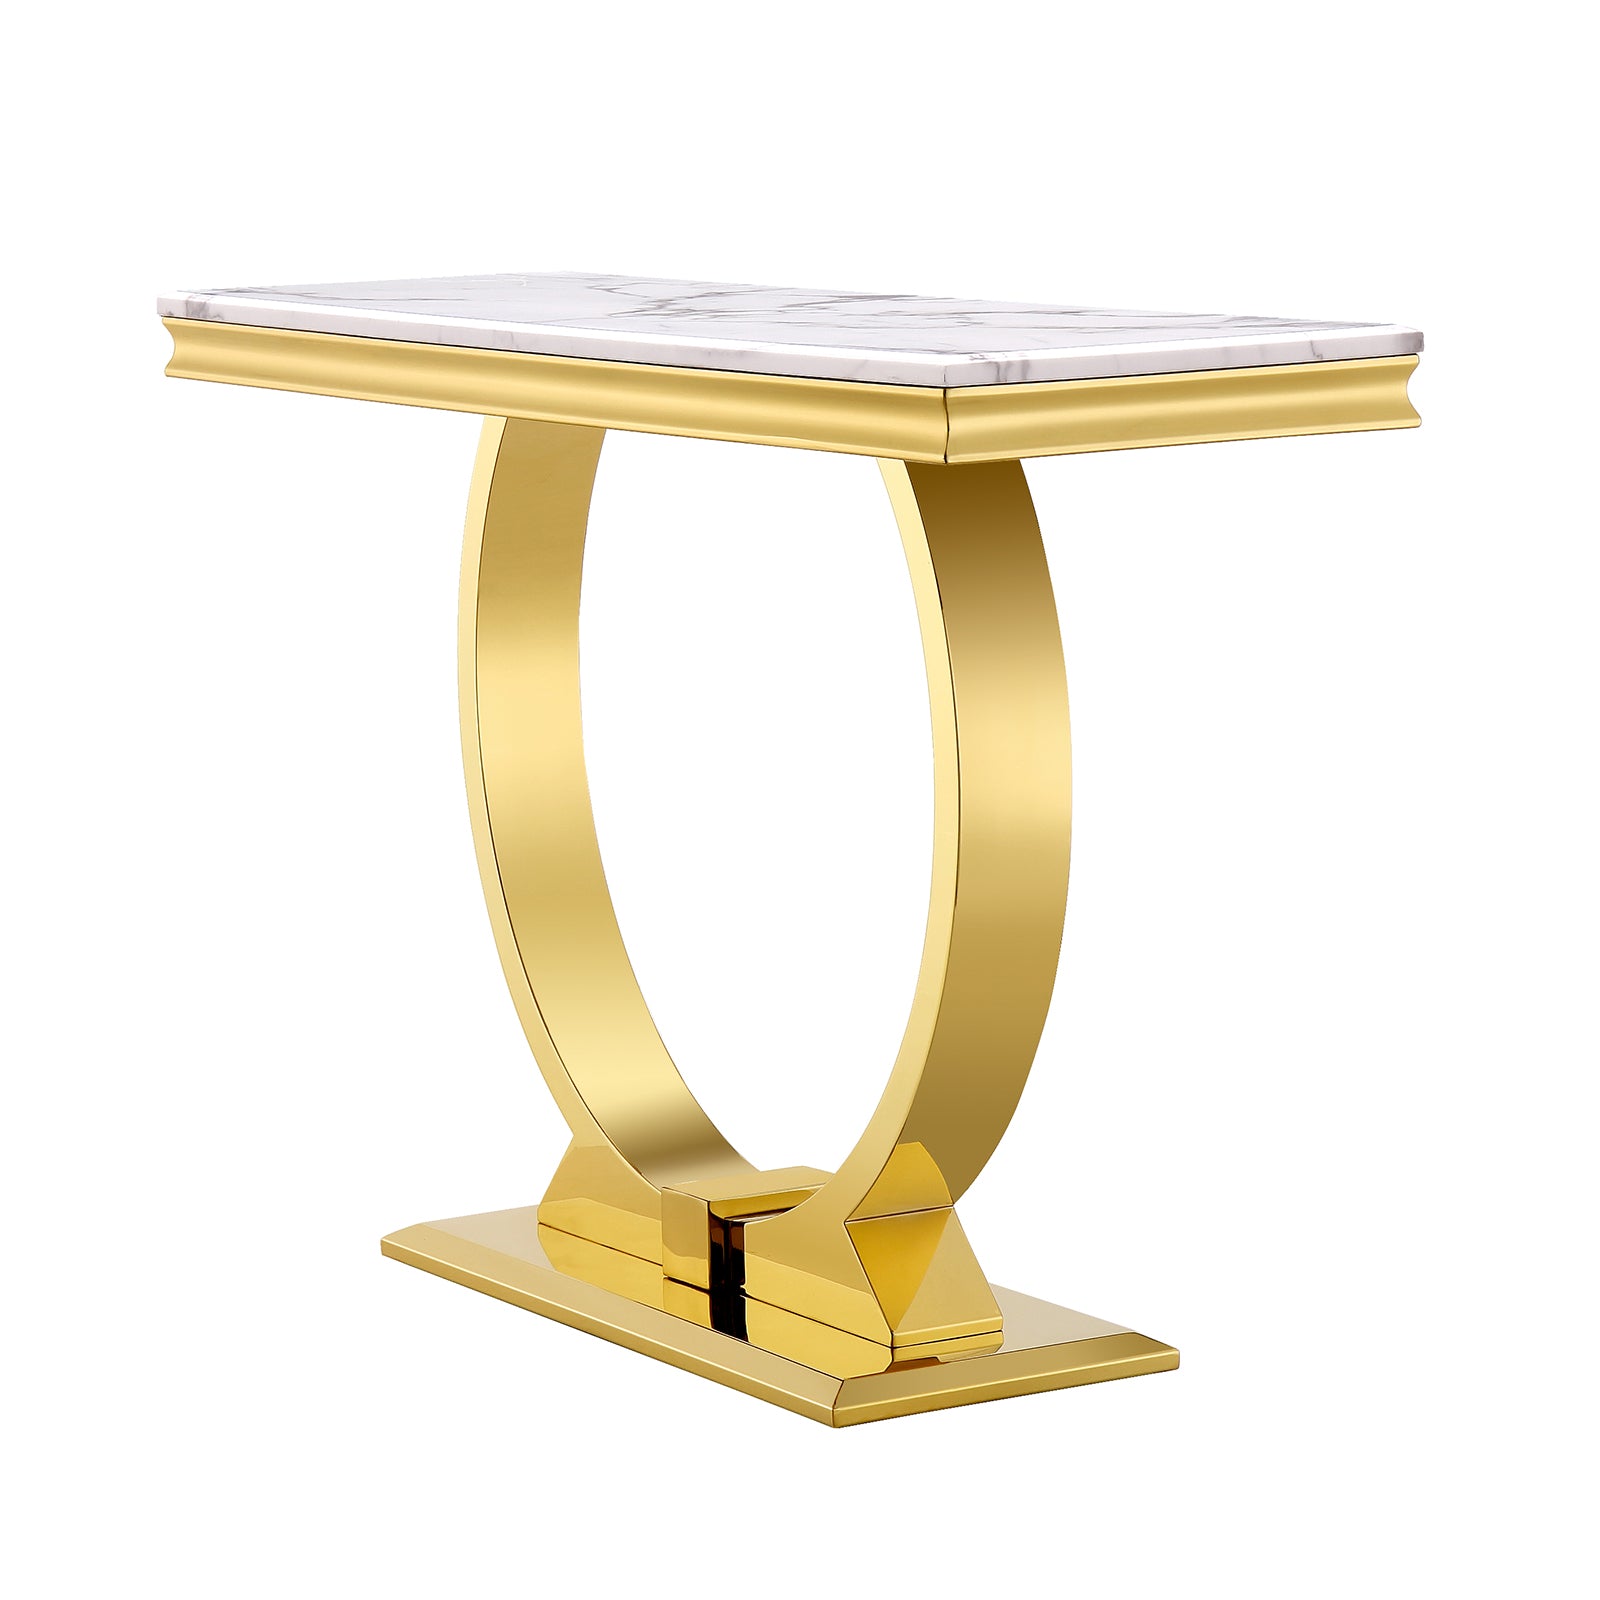 A Harmonious Symphony: Enhancing Your Space with a White and Gold Console Table